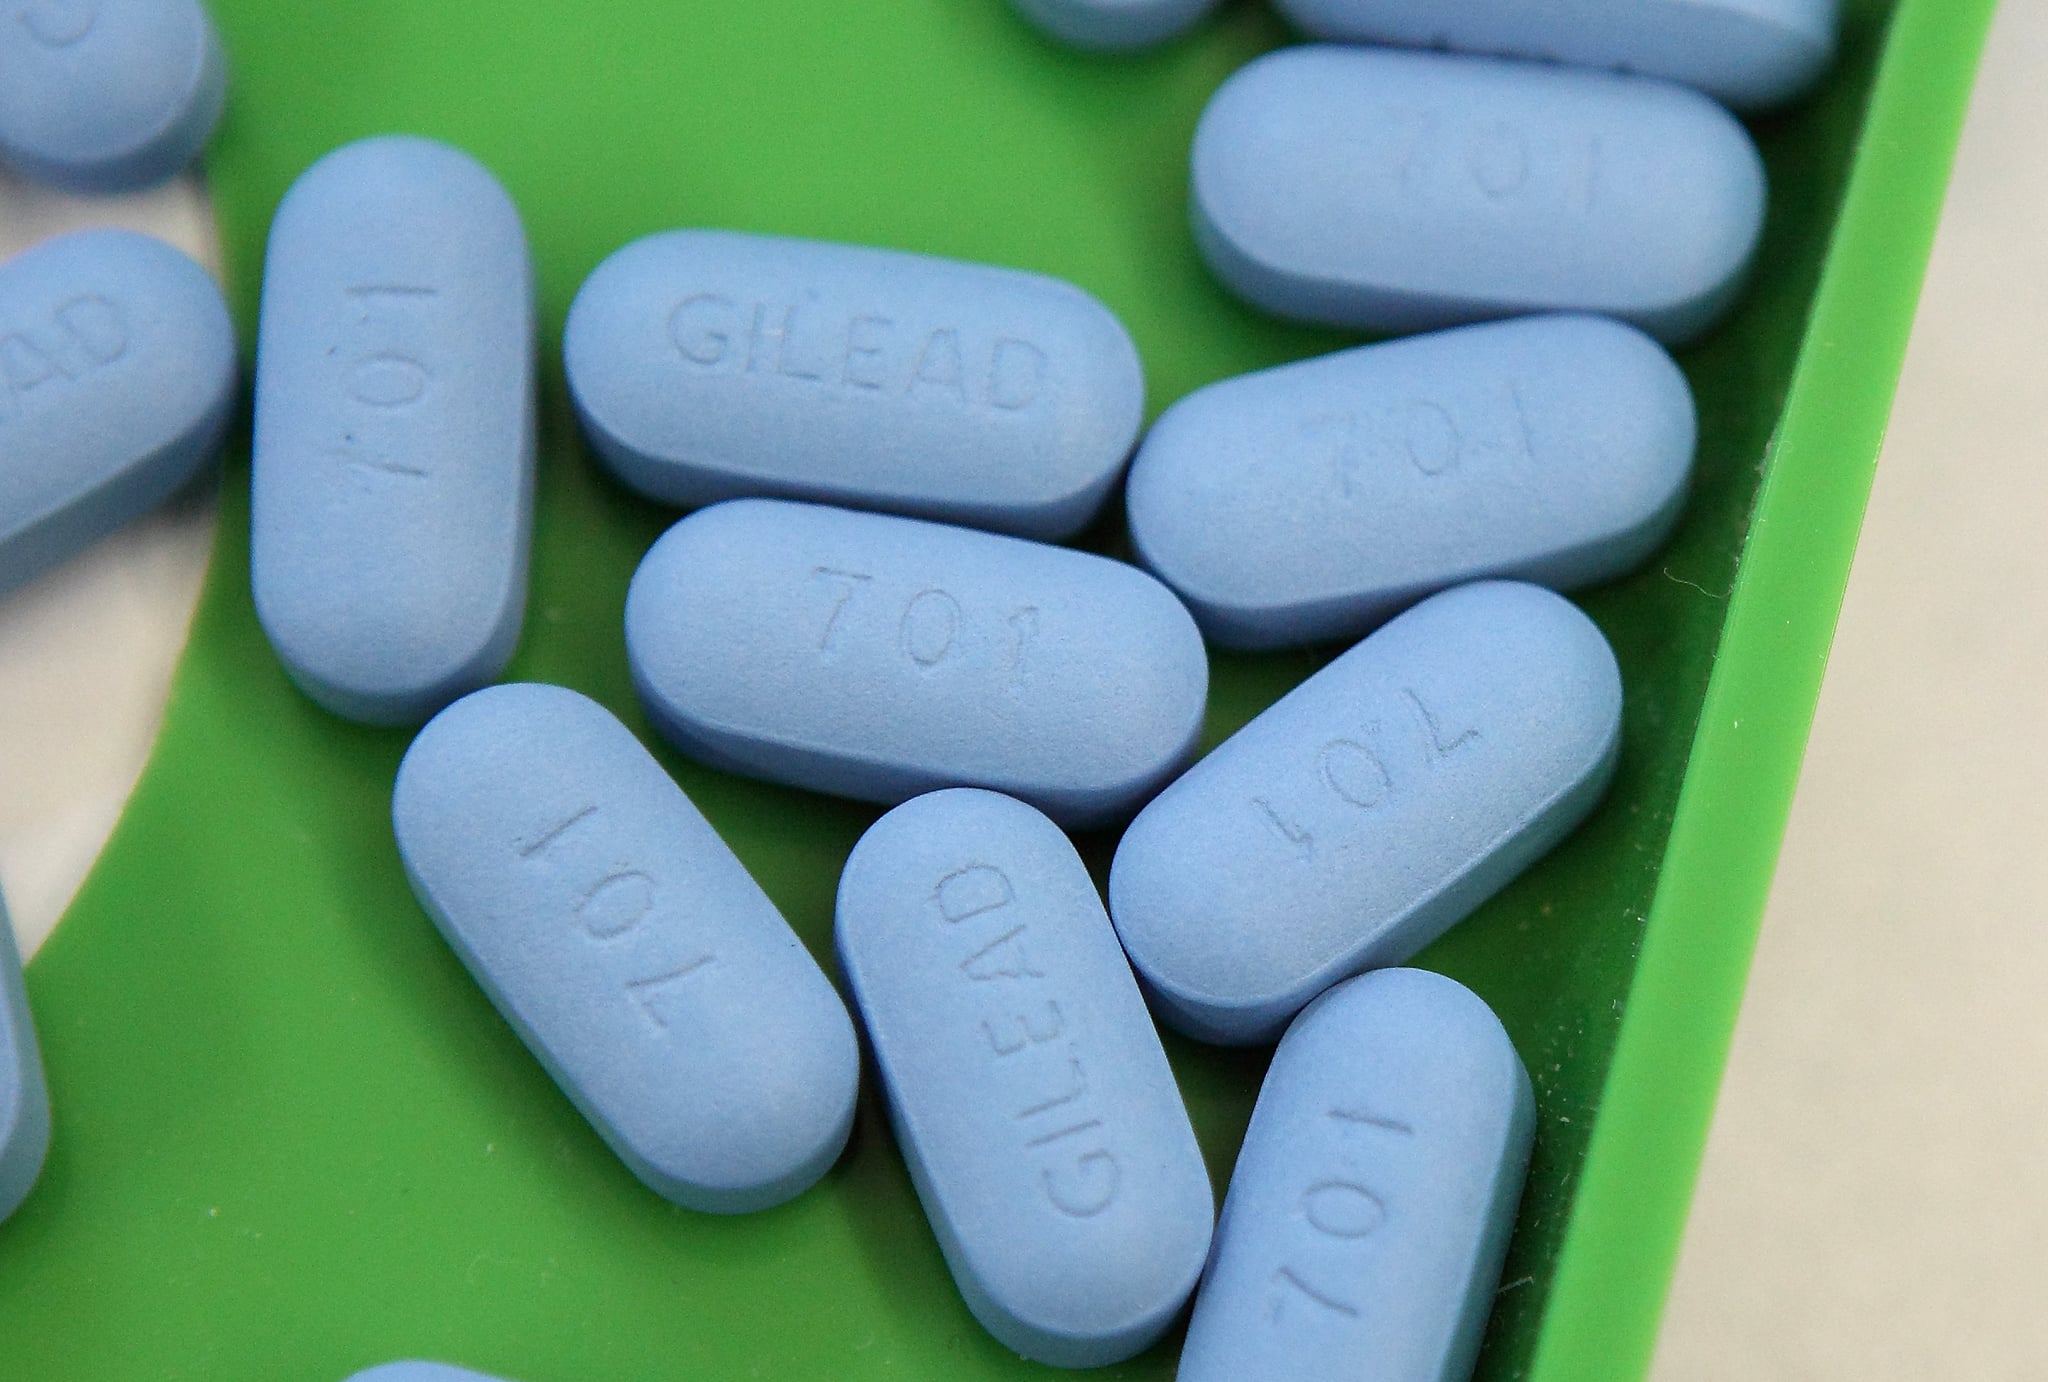 SAN ANSELMO, CA - NOVEMBER 23:  Antiretroviral pills Truvada sit on a tray at Jack's Pharmacy on November 23, 2010 in San Anselmo, California. A study published by the New England Journal of Medicine showed that men who took the daily antiretroviral pill Truvada significantly reduced their risk of contracting HIV.  (Photo Illustration by Justin Sullivan/Getty Images)